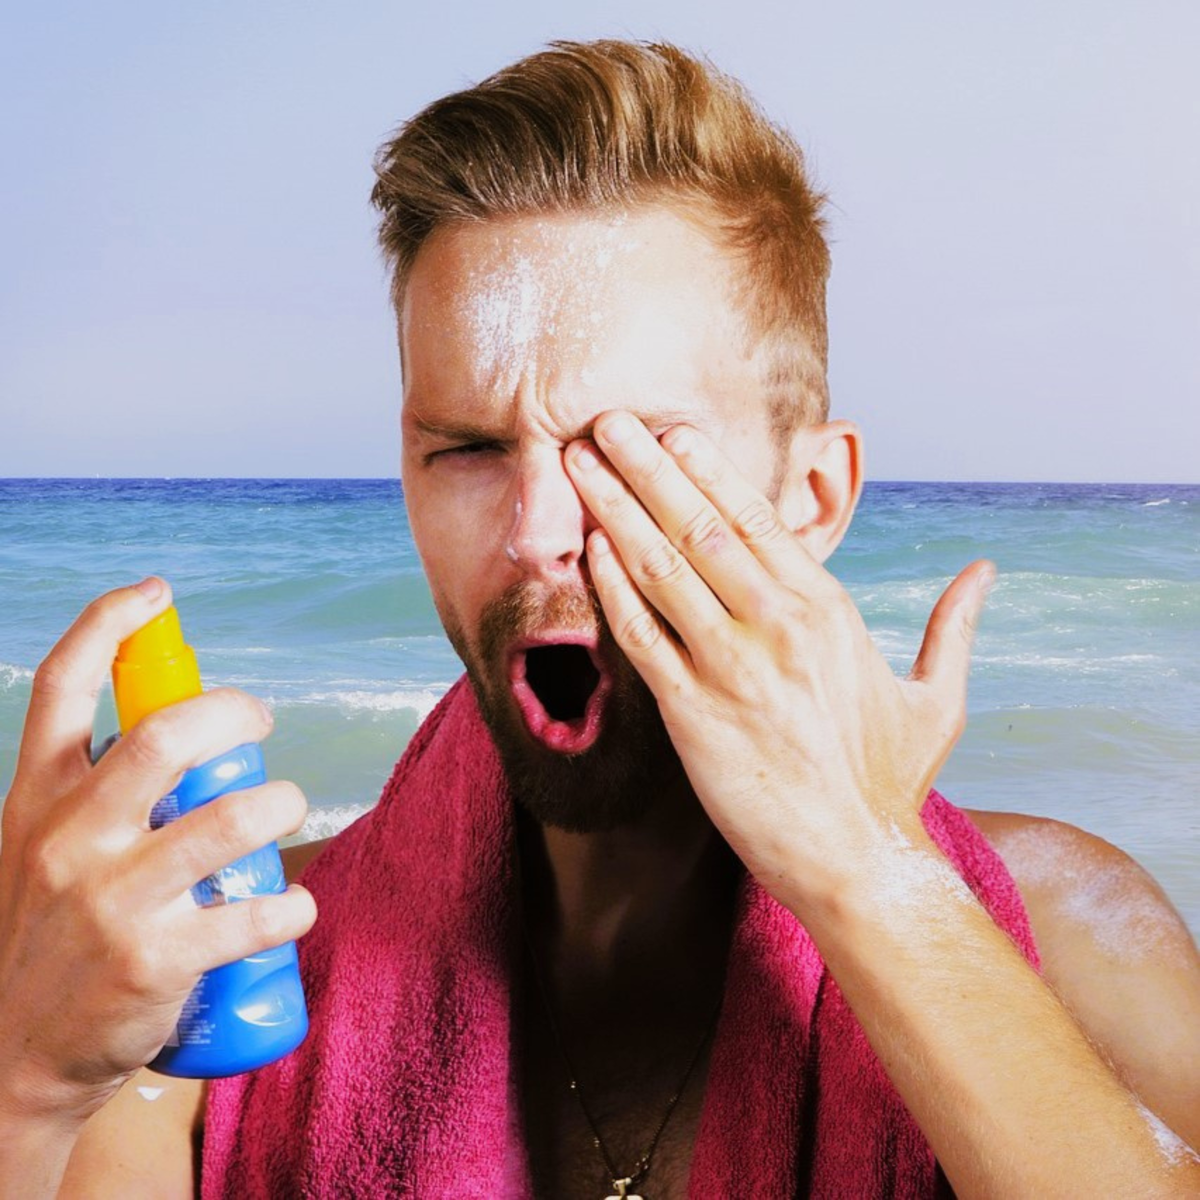 Man wincing from sunscreen in his eyes